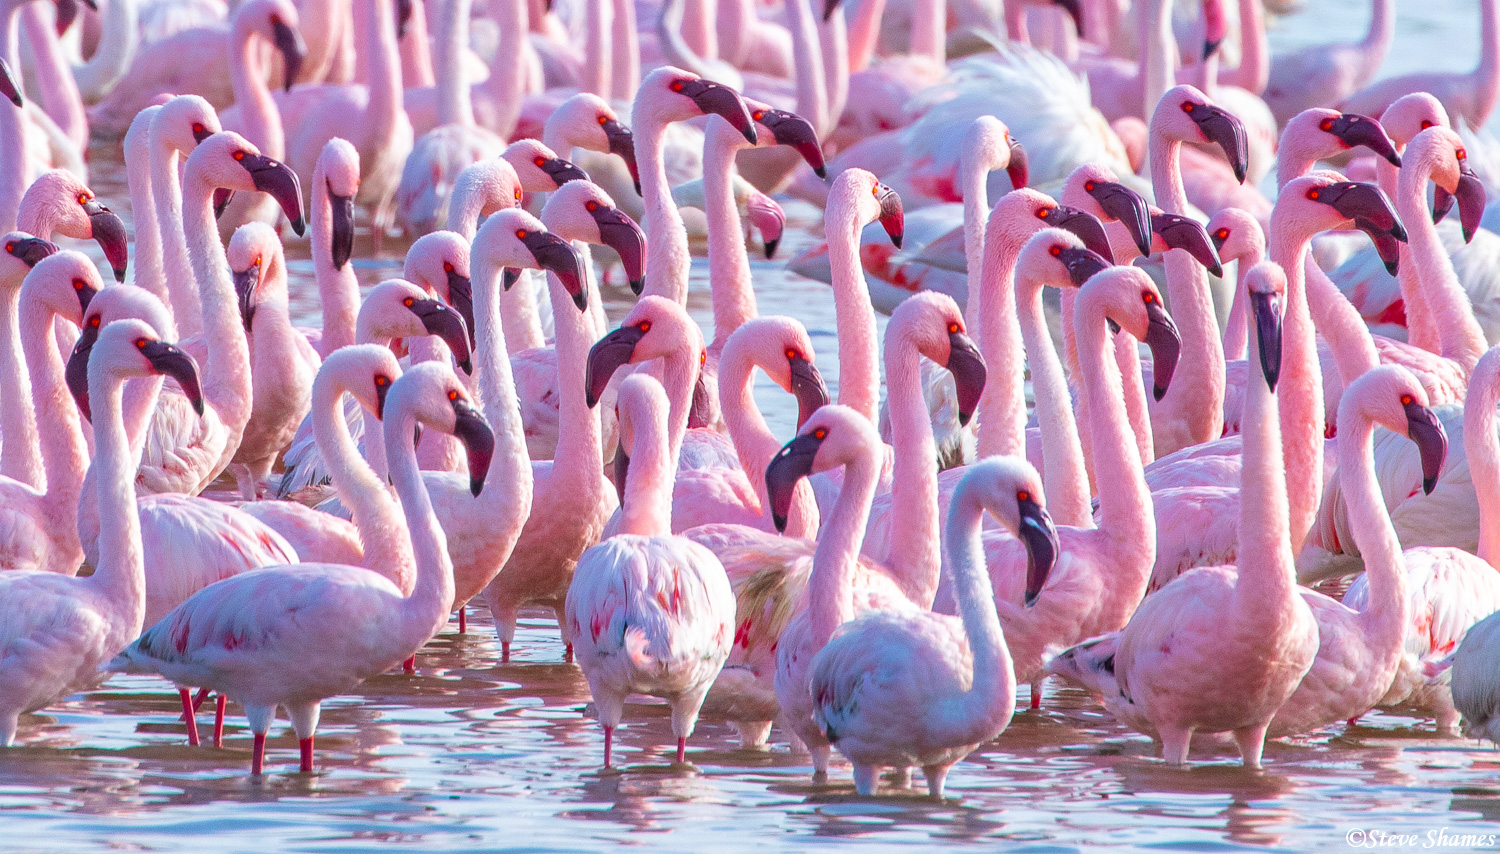 Some of the most colorful birds in Africa -- pink flamingos.